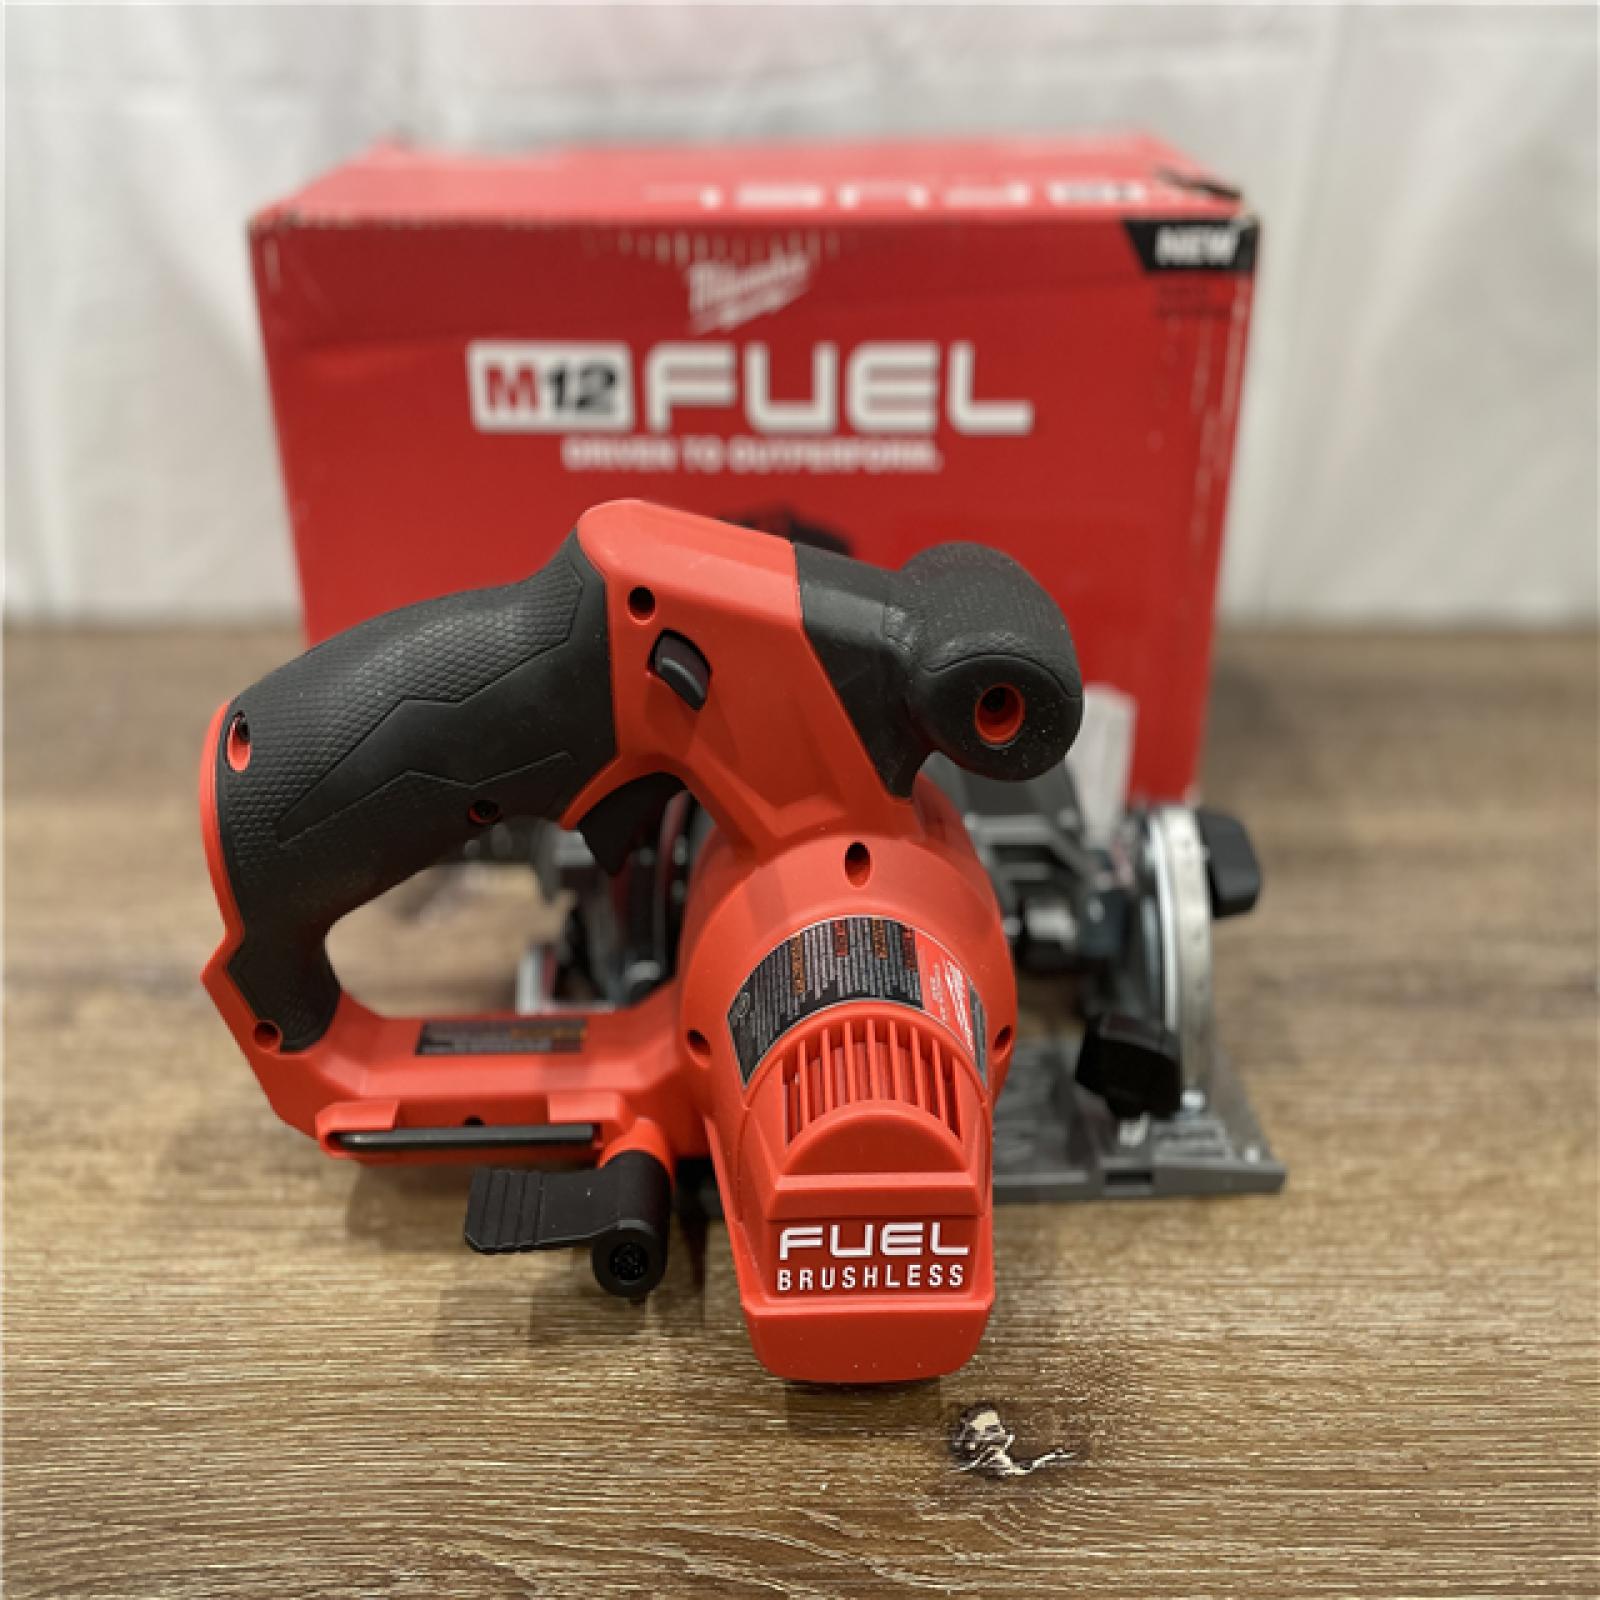 AS-IS Milwaukee  M12 Fuel 5-1/2  12V Cordless Brushless Circular Saw Bare Tool